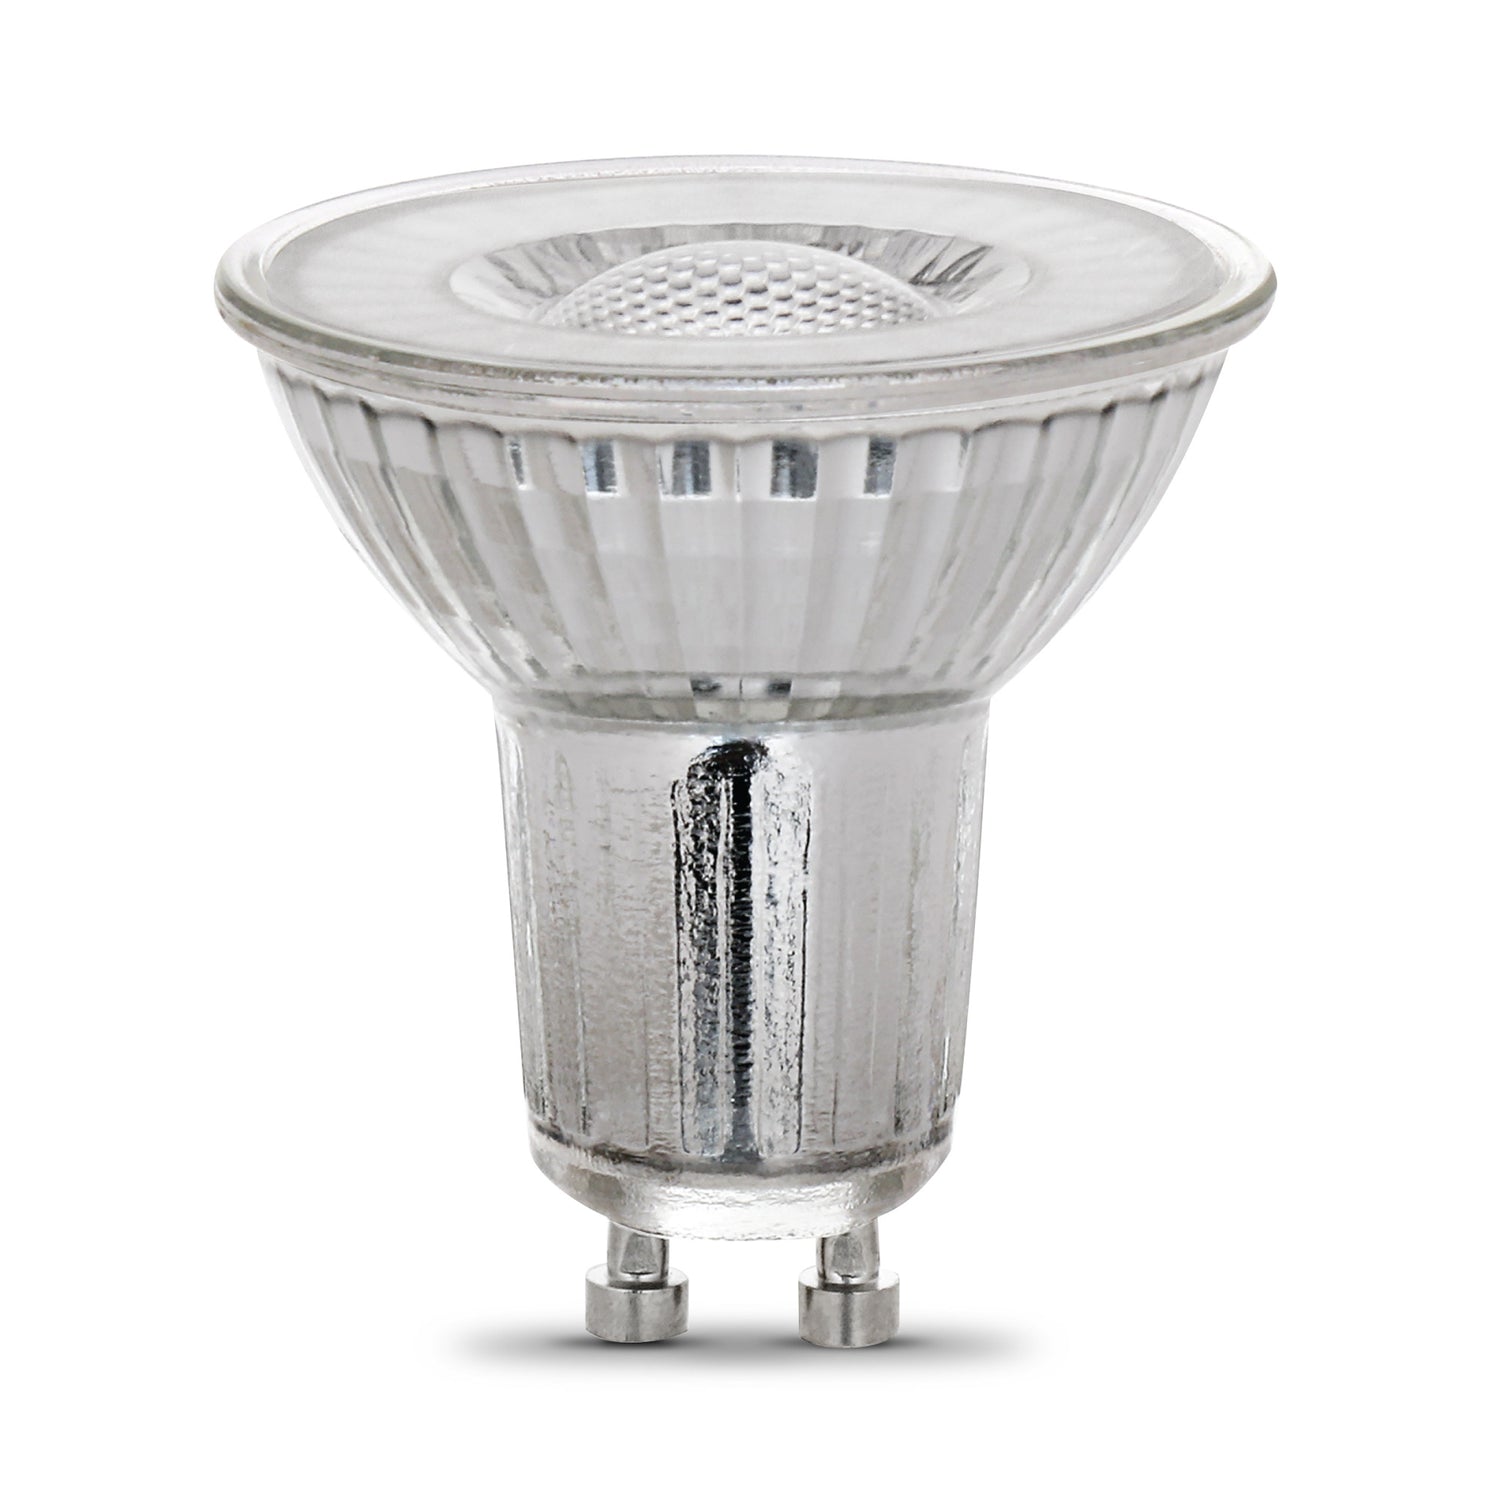 35W ReplacementMR16 Dimmable Enhance Reflector LED